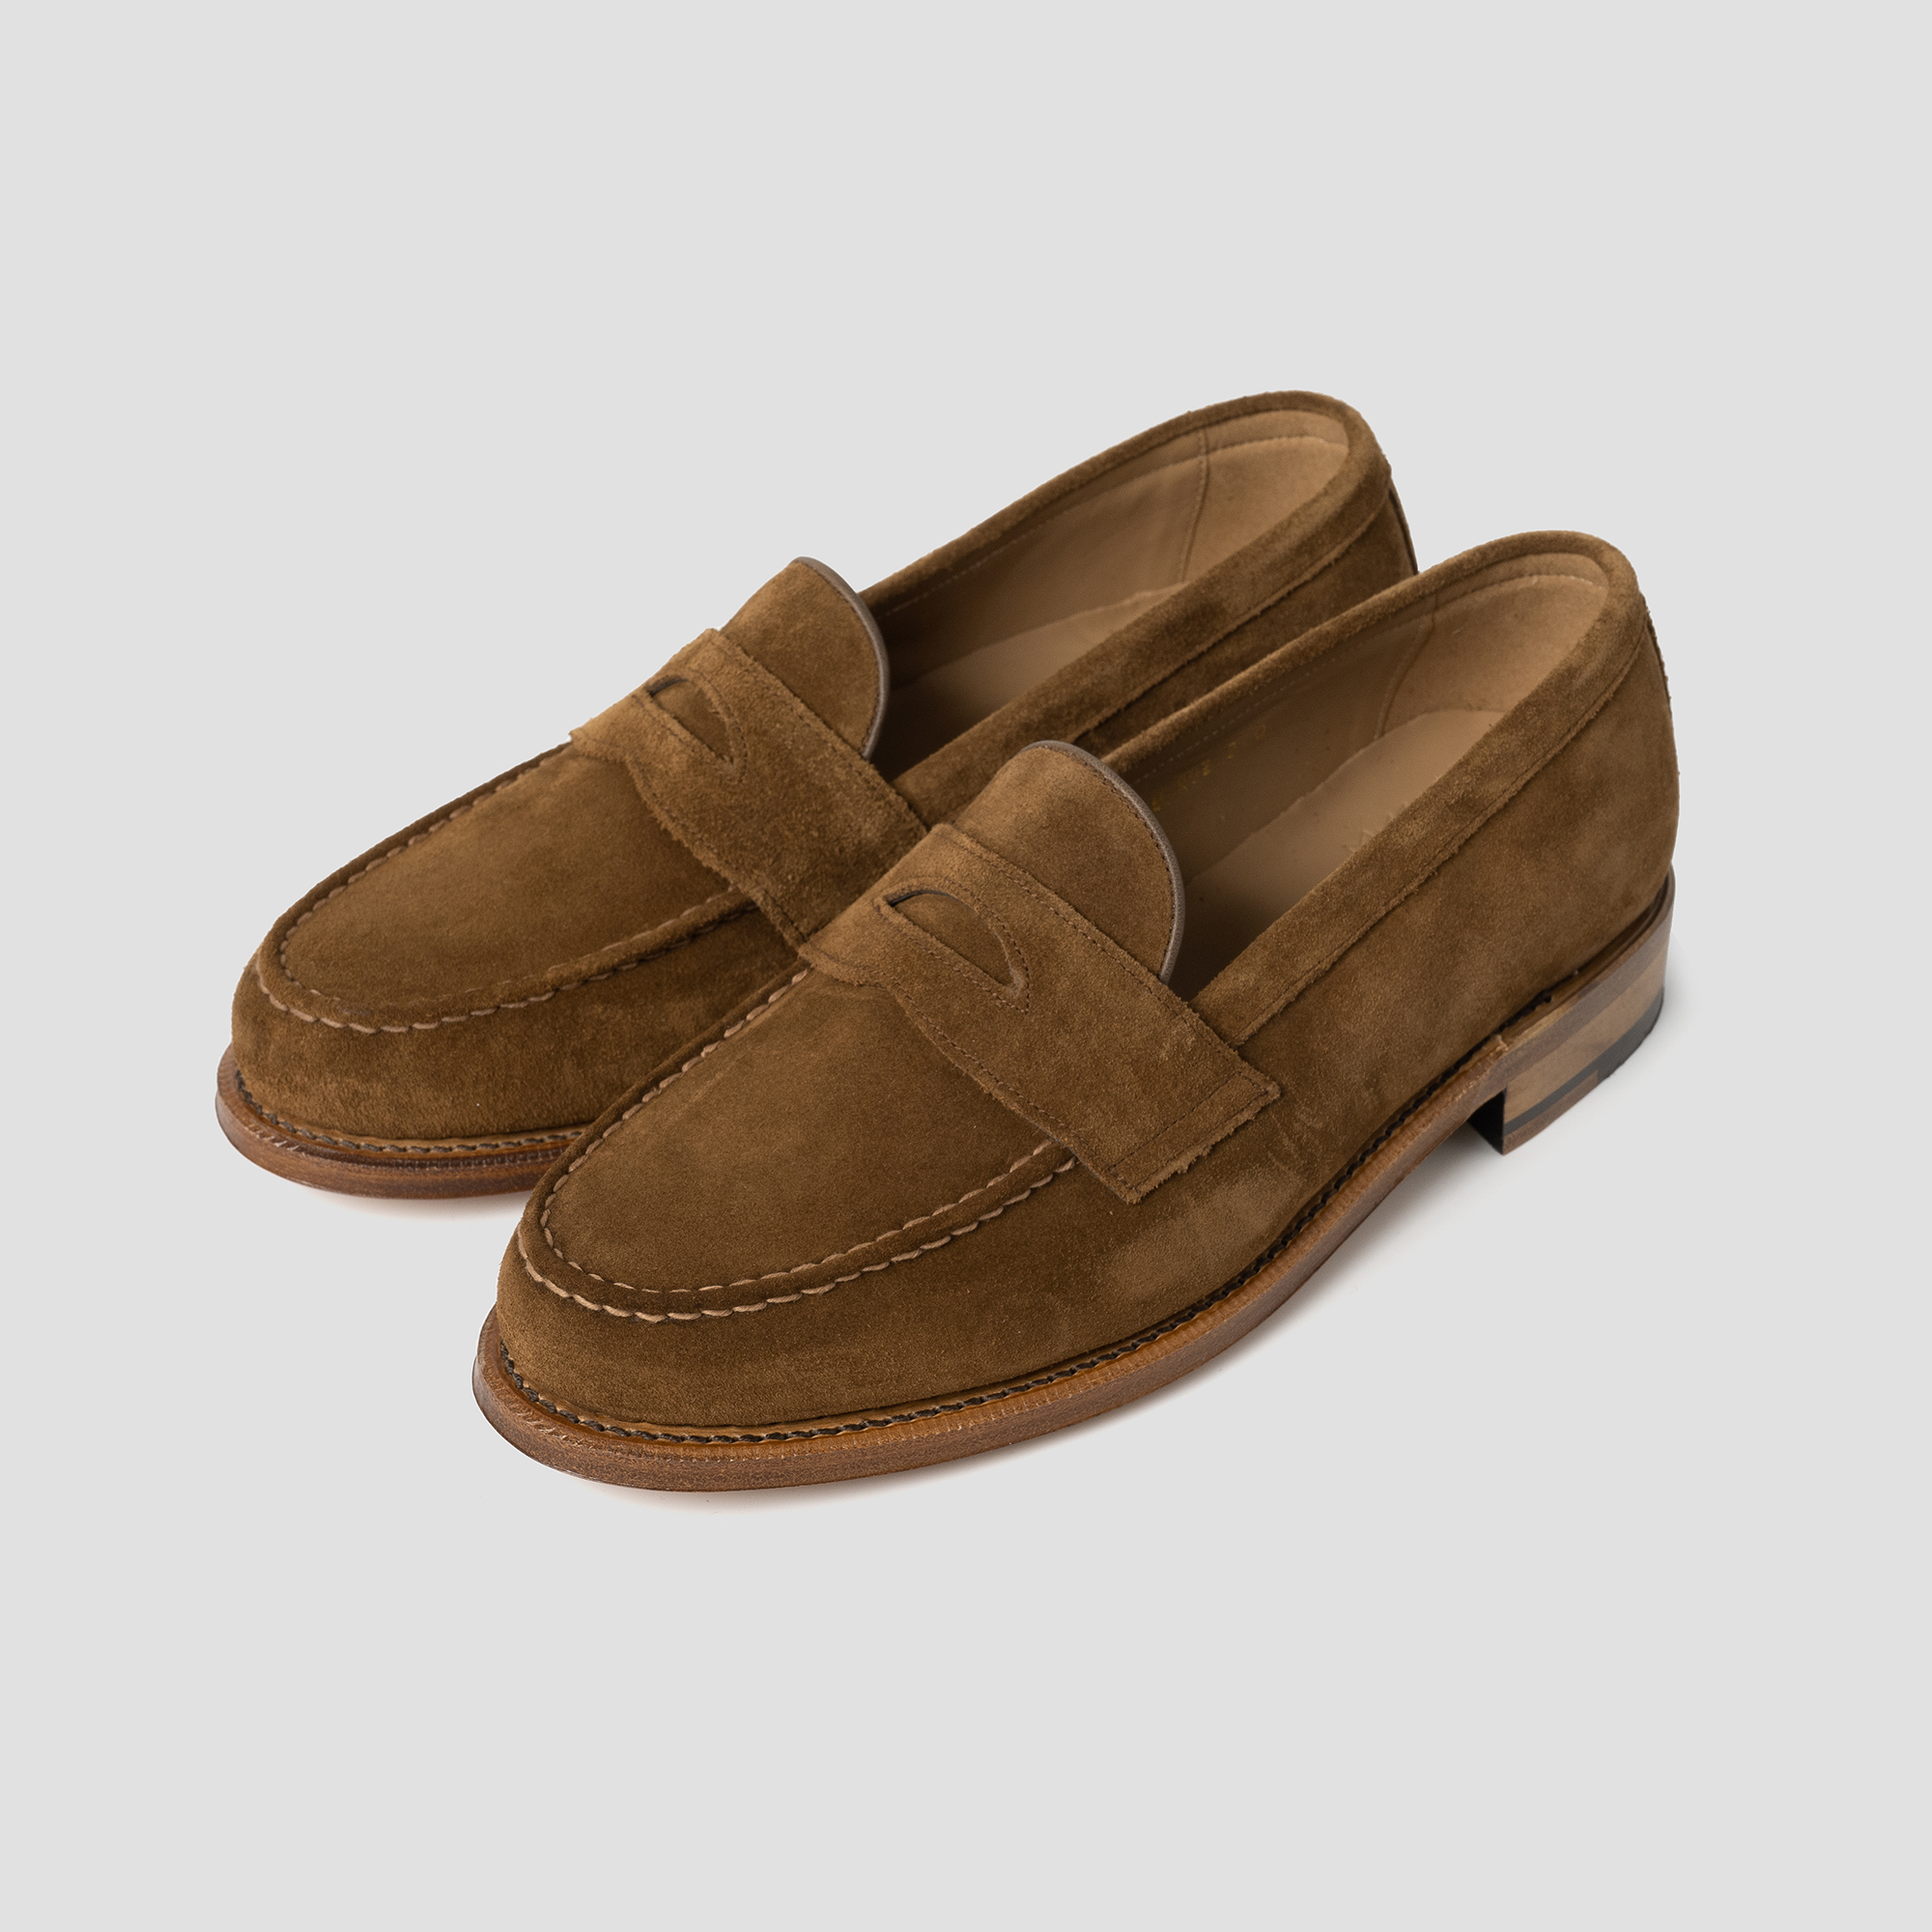 MELAVORO Goodyear Welted Suede Penny Loafer [Brown]